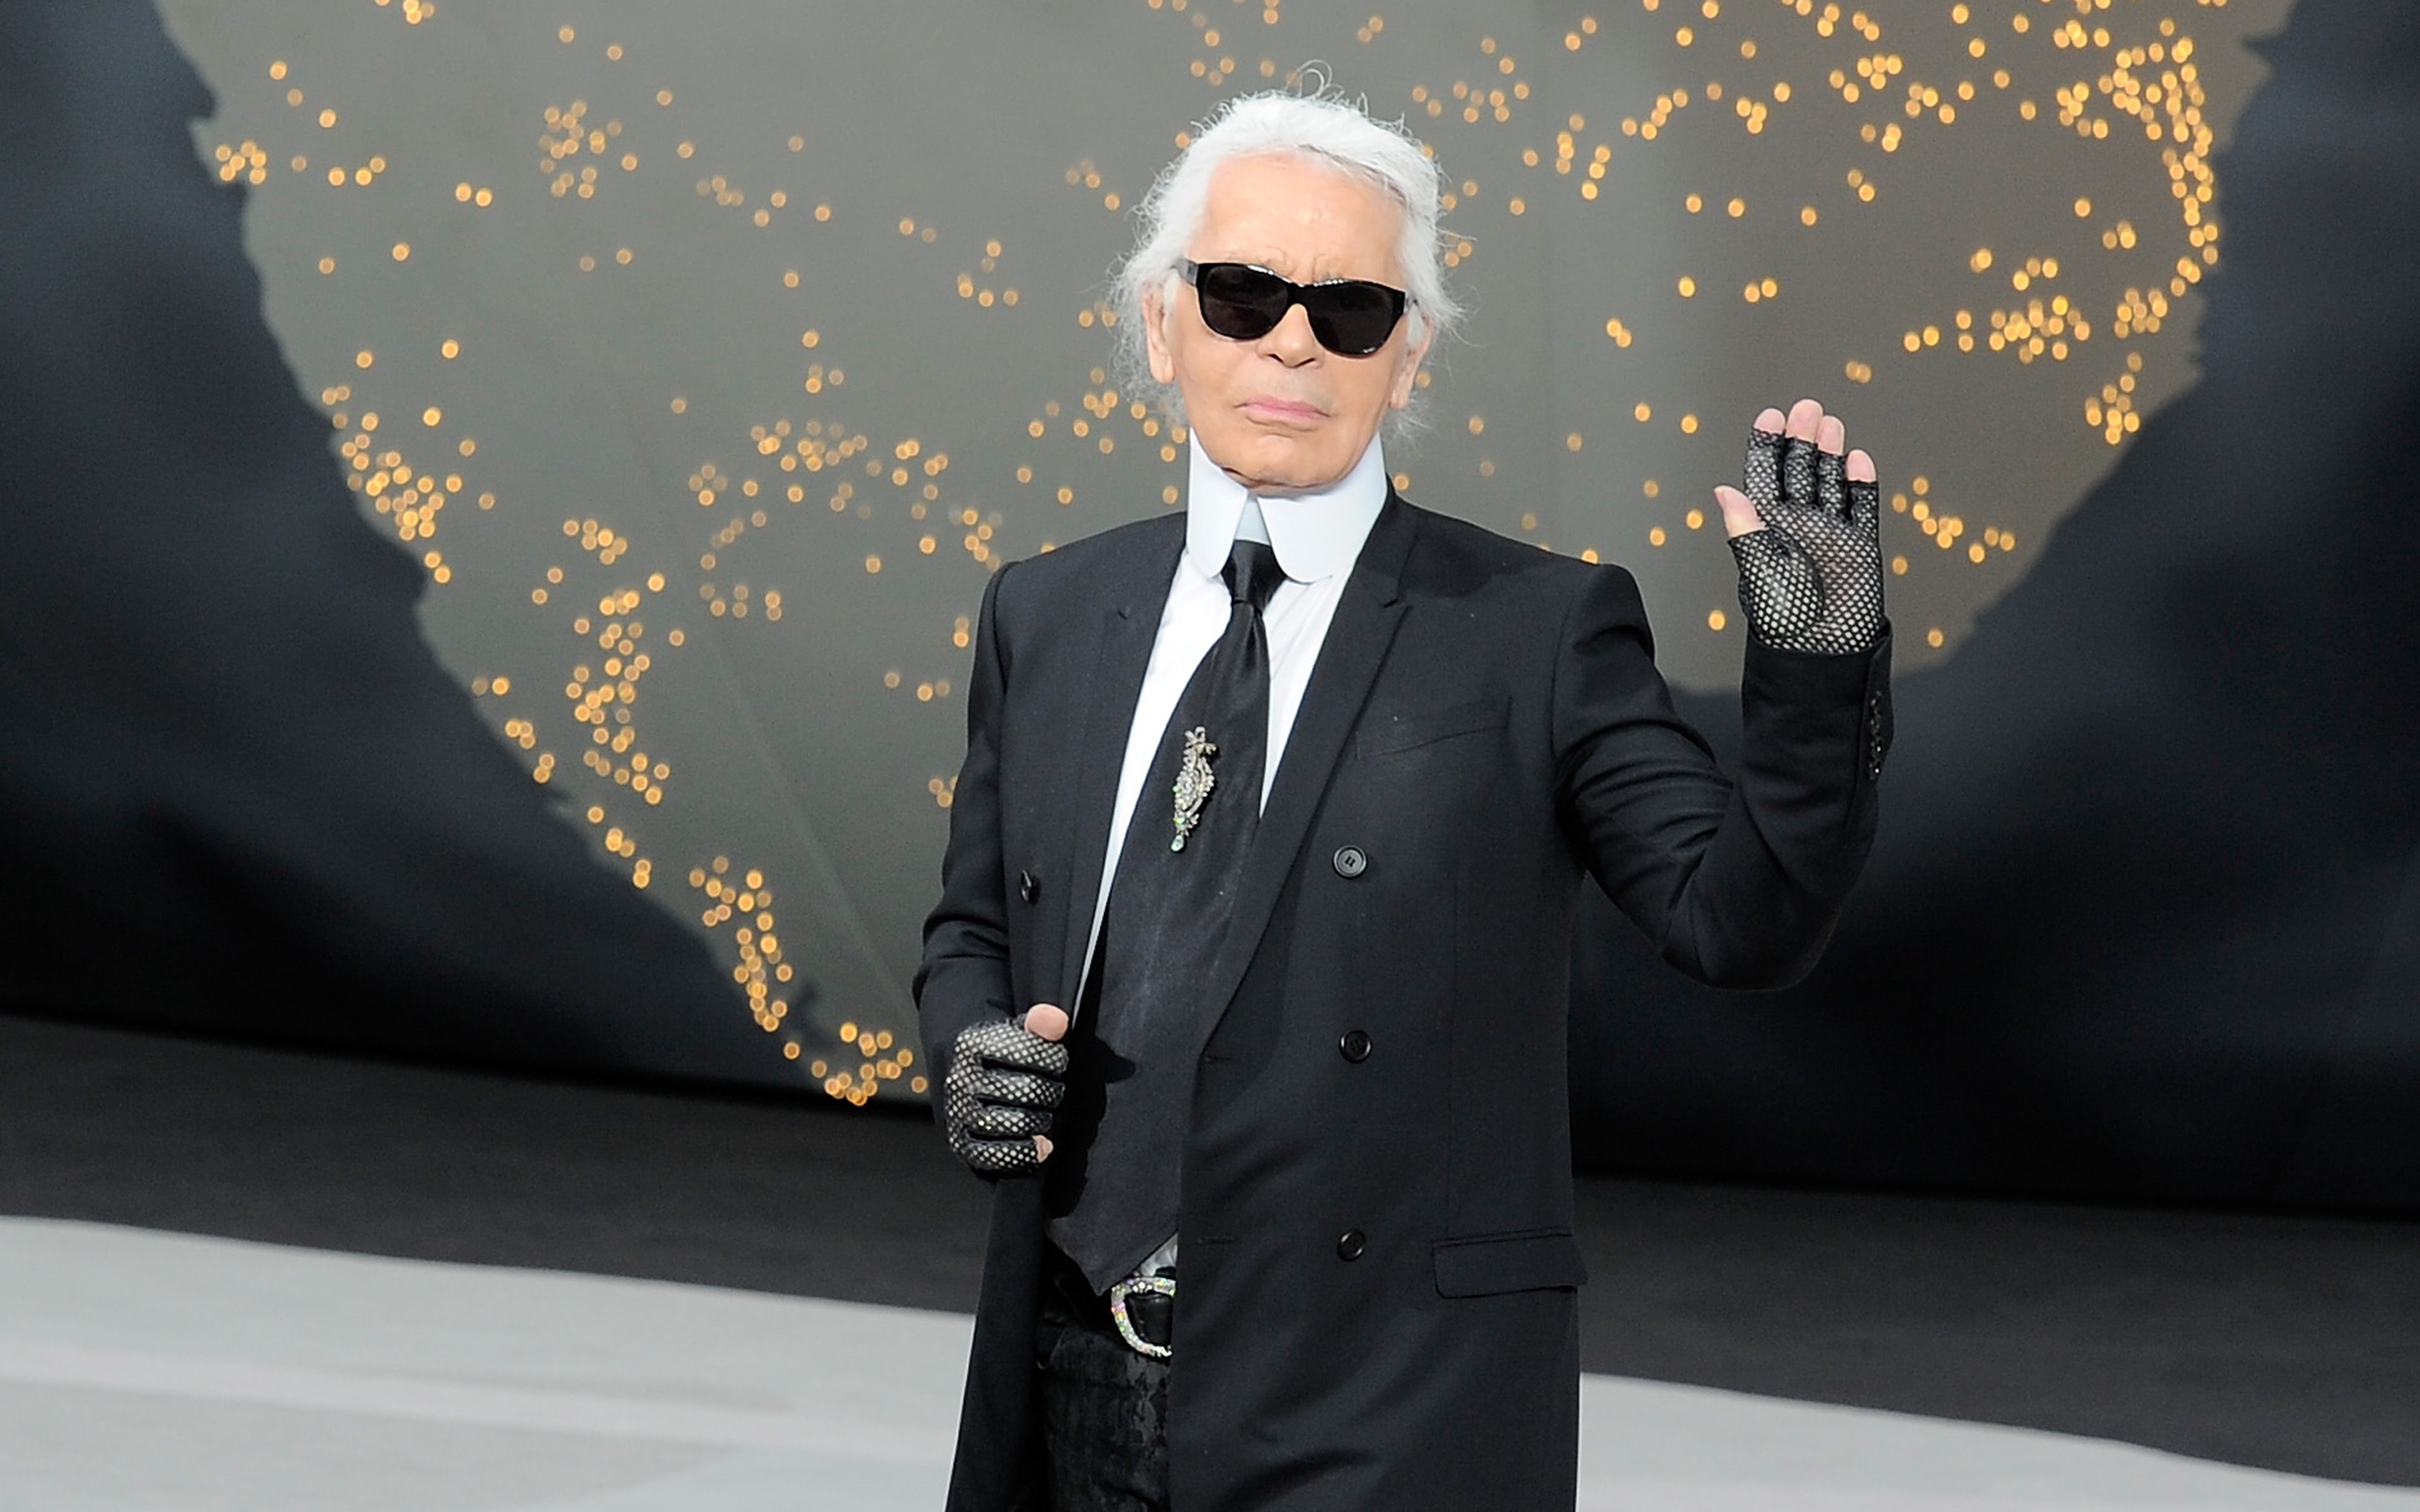 Karl Lagerfeld: the controversial and pioneering designer inspiring this  year's Met Gala dress code